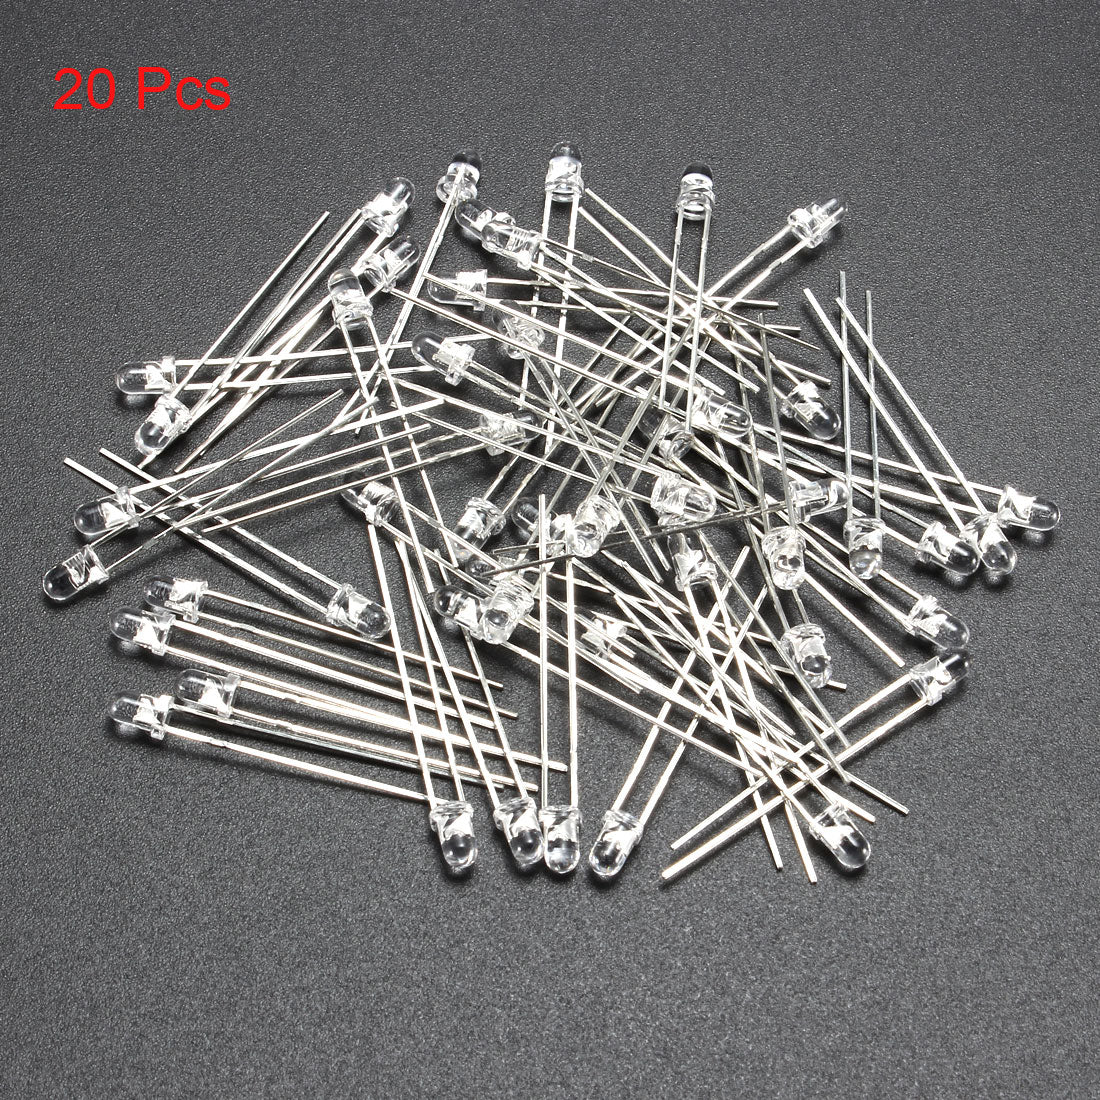 uxcell Uxcell 20pcs 3mm 940nm Infrared Emitter Diodes DC1.2V LED IR Emitter Clear Round Head